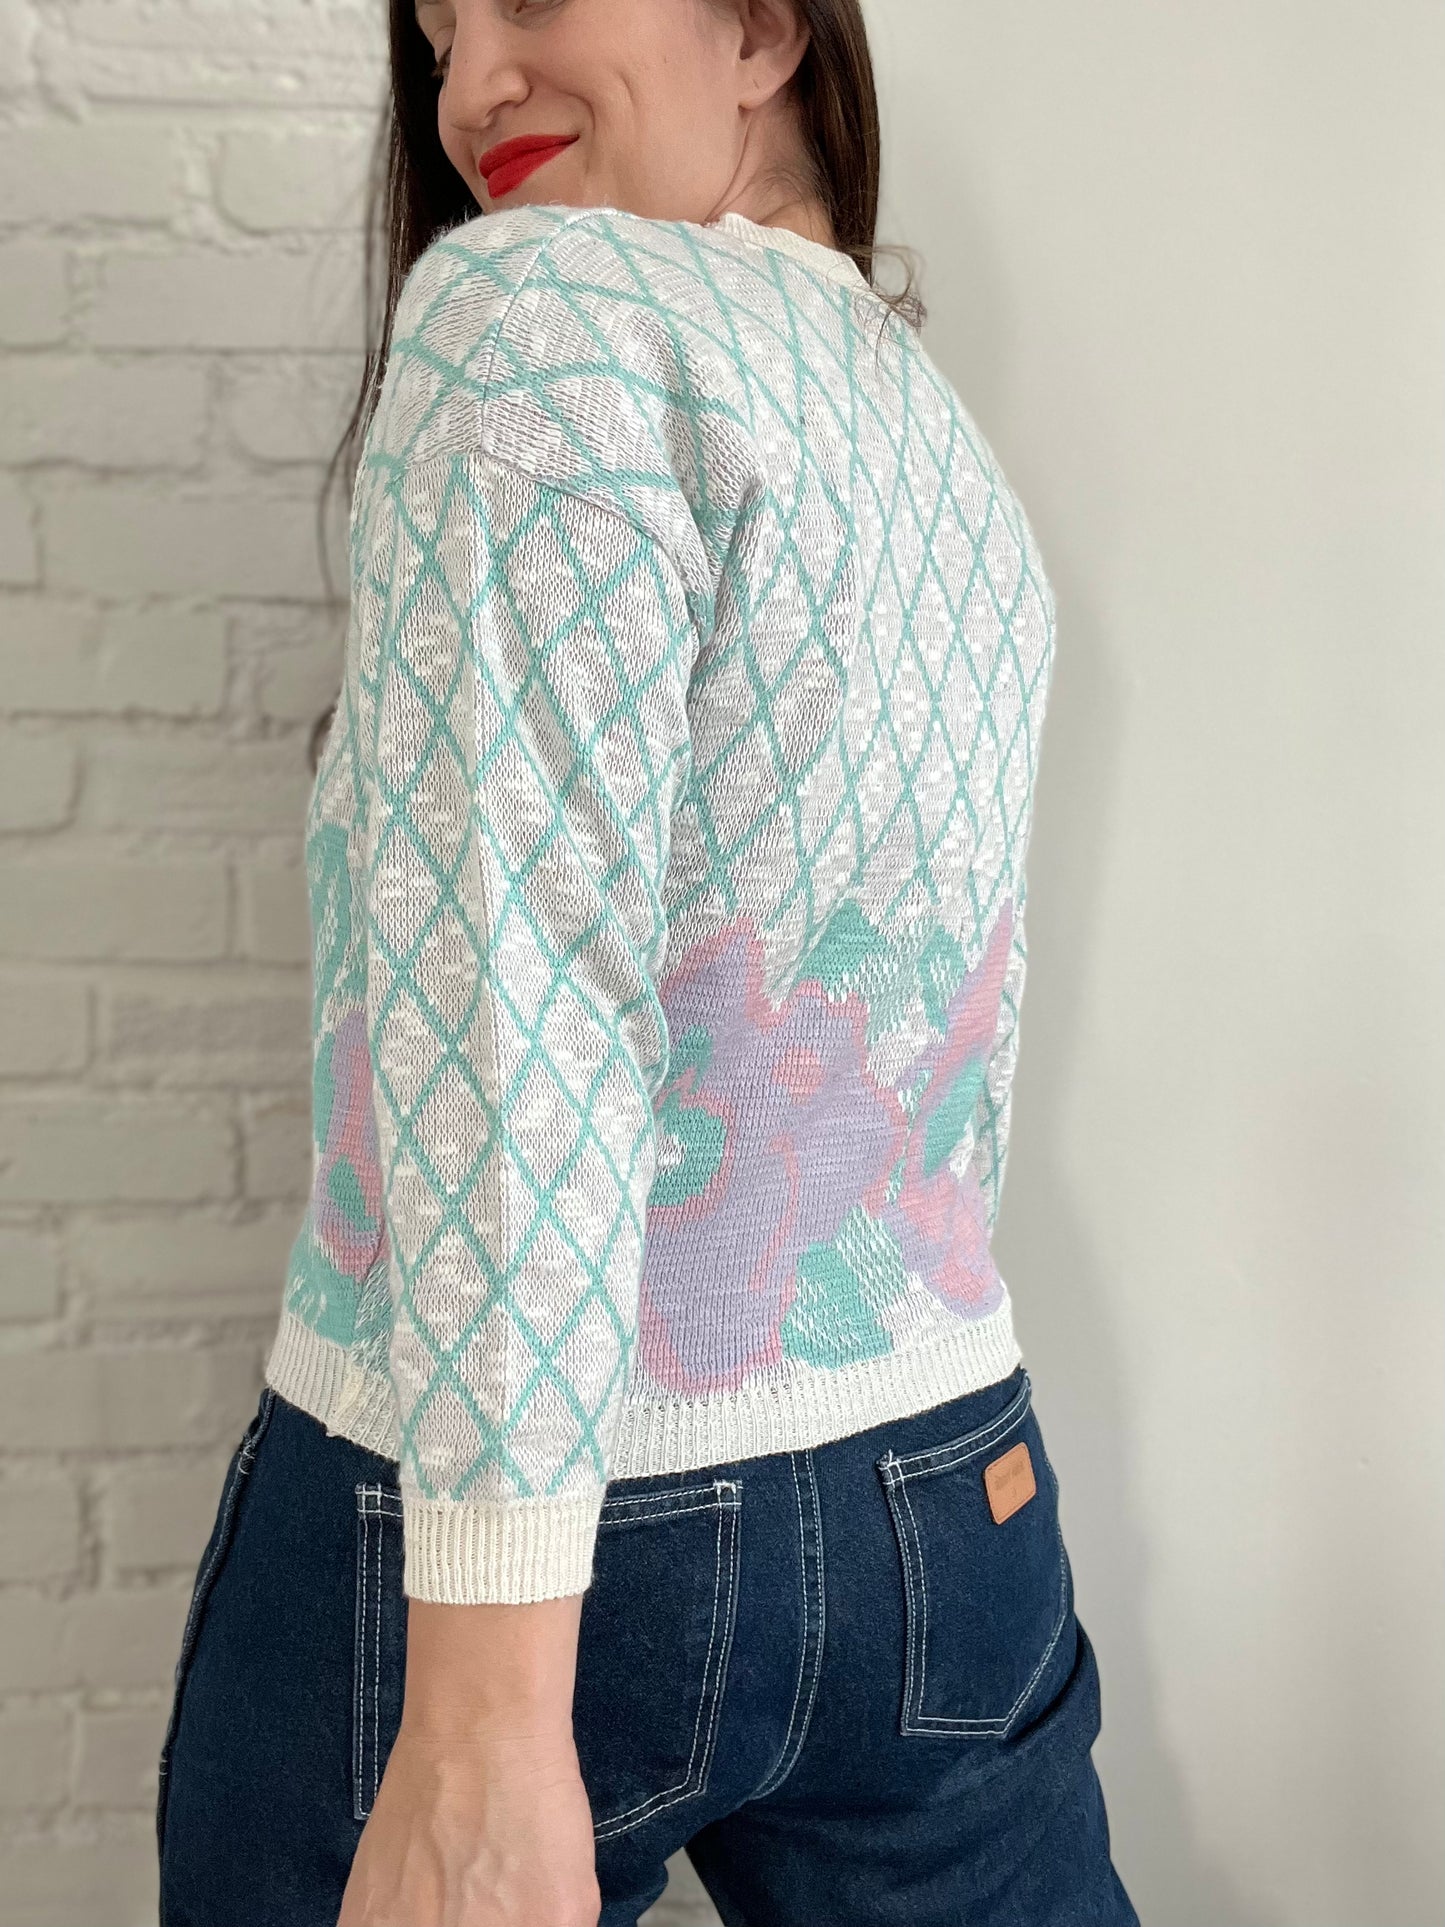 Abstract Roses Preppy Sweater - XS/S